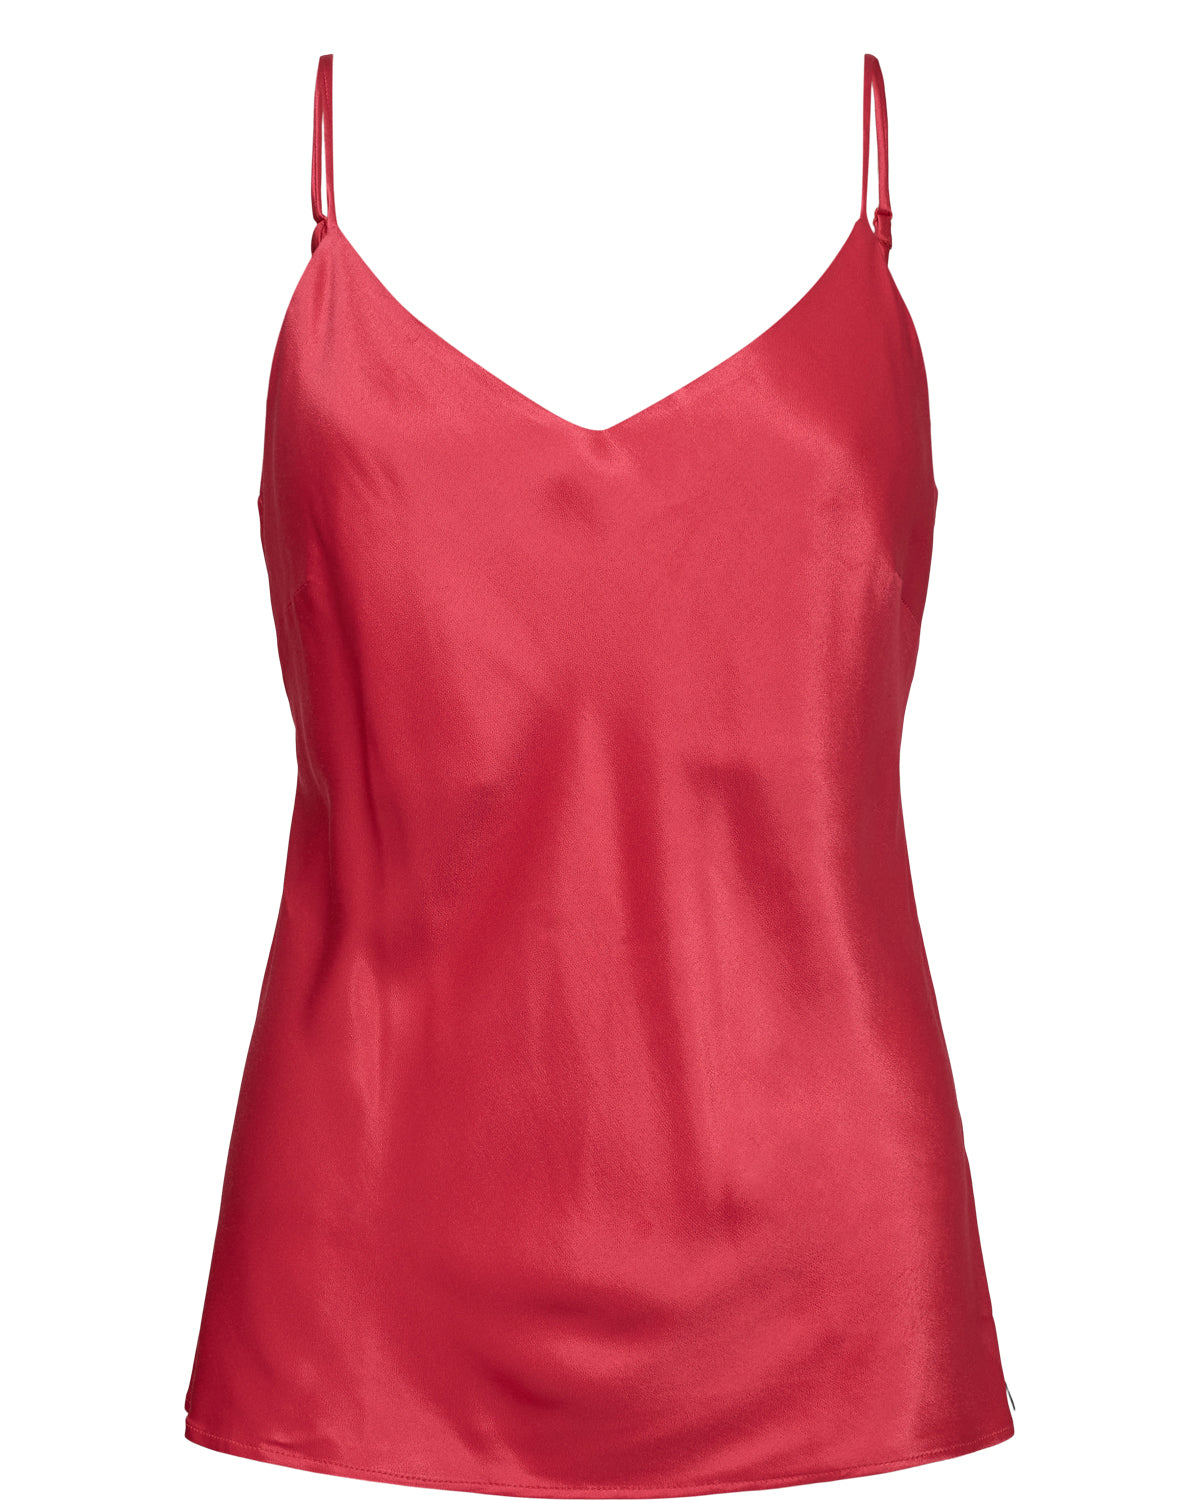 Super pretty strappy vest in a beautiful Teaberry red from scandi brand Numph. A gorgeous piece that can be worn with the matching skirt or paired with jeans or cargo pants. It has adjustable straps and a V at the front . The back is straight across above the bra strap. The fit is true to size